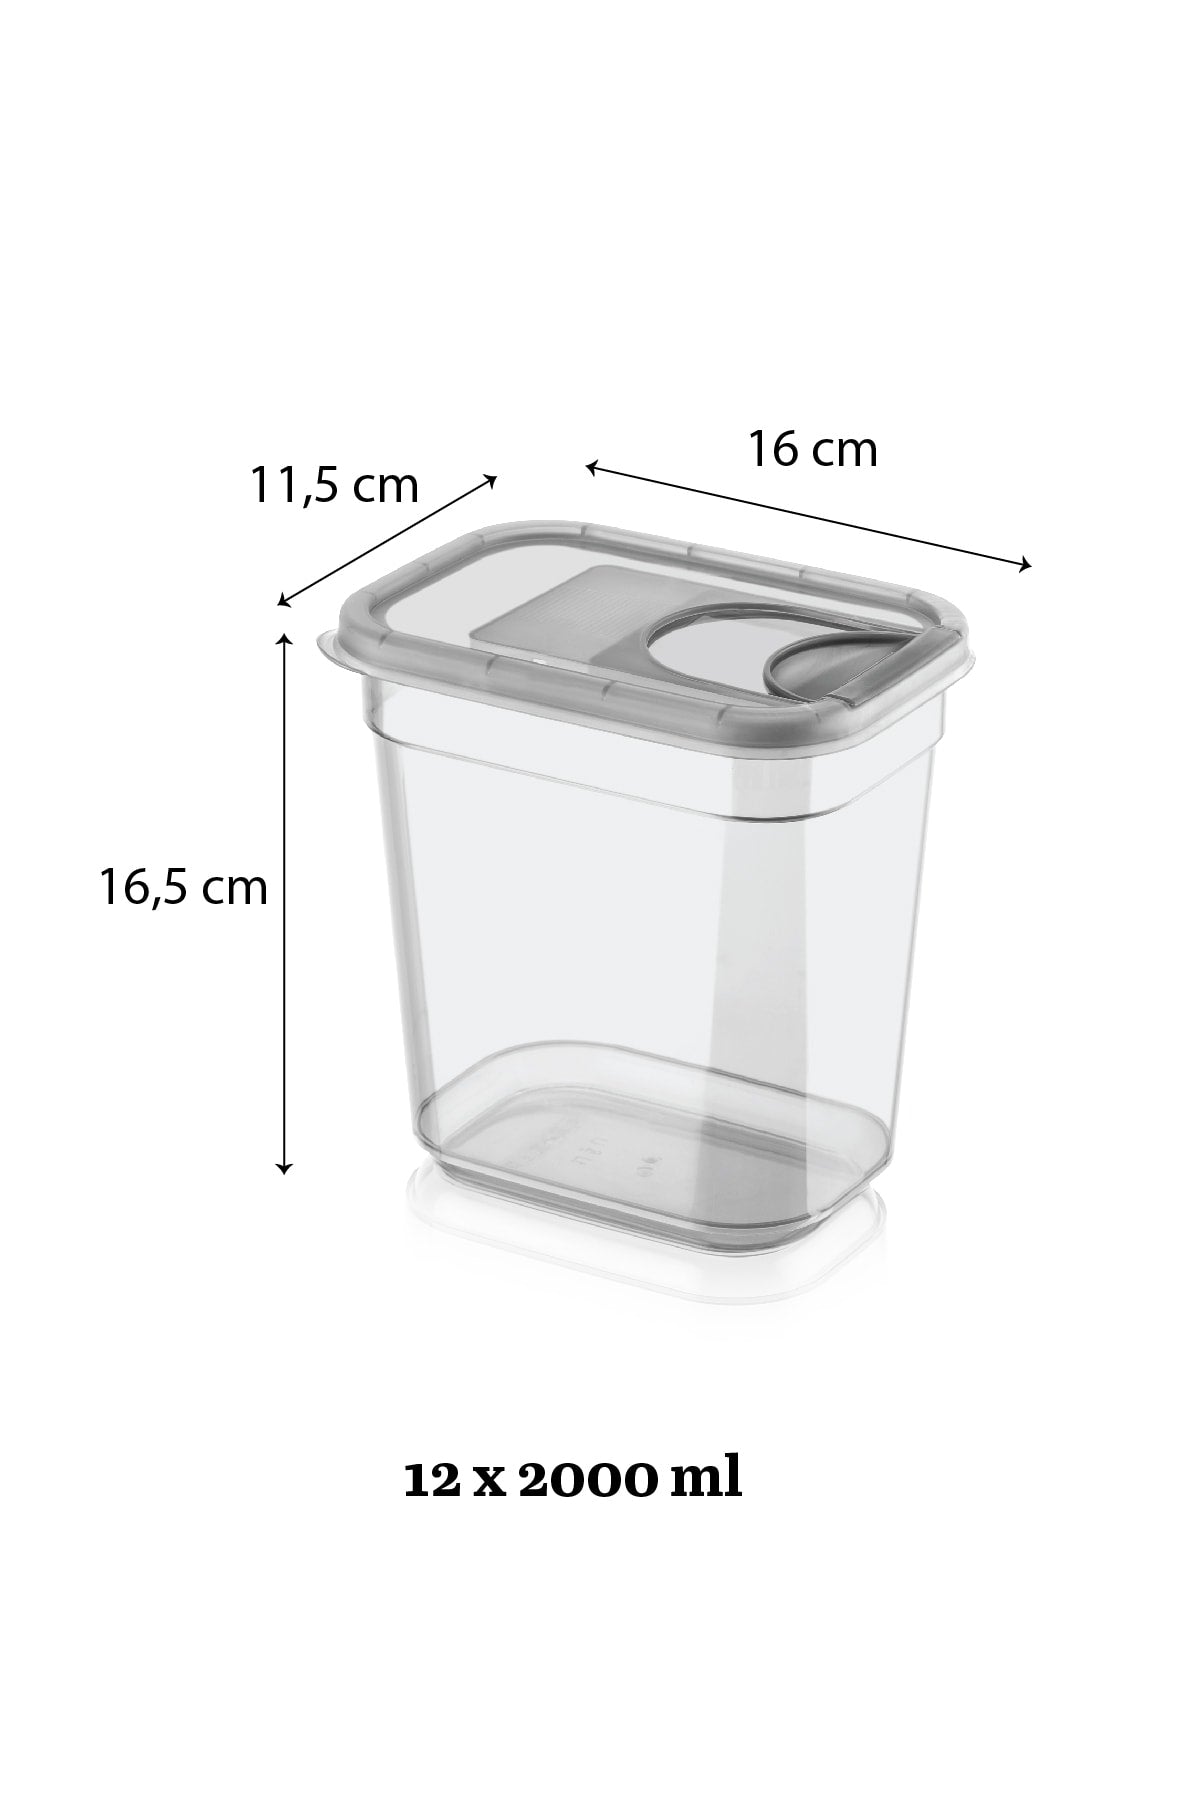 12 Pcs Tiny Labeled Sliding Lid Food Storage Container - Rectangular Jar Legumes Container 12x2000 ml